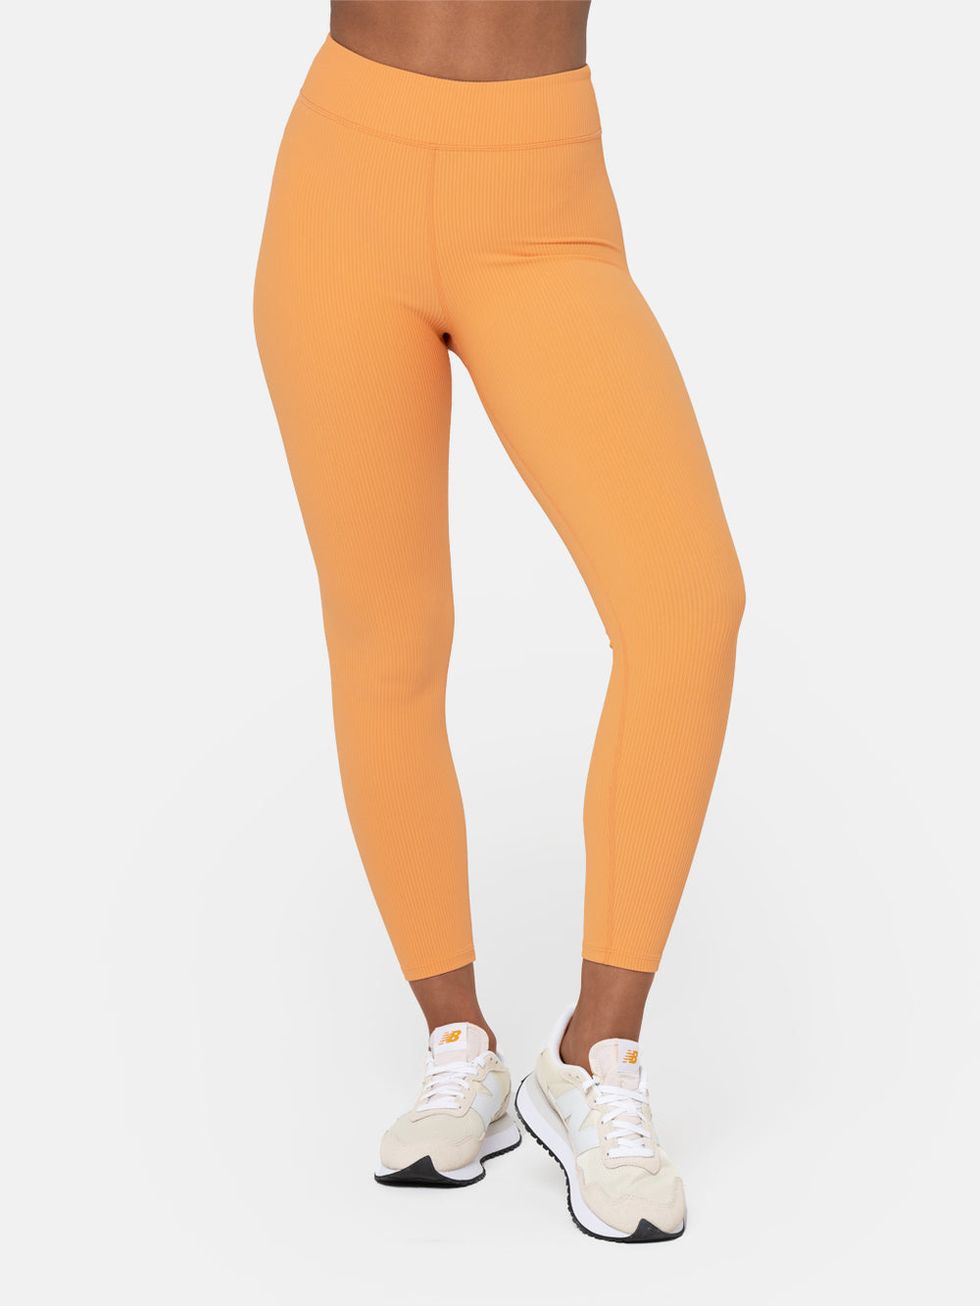 26 Best Leggings On  Of 2023, According Experts And Editors